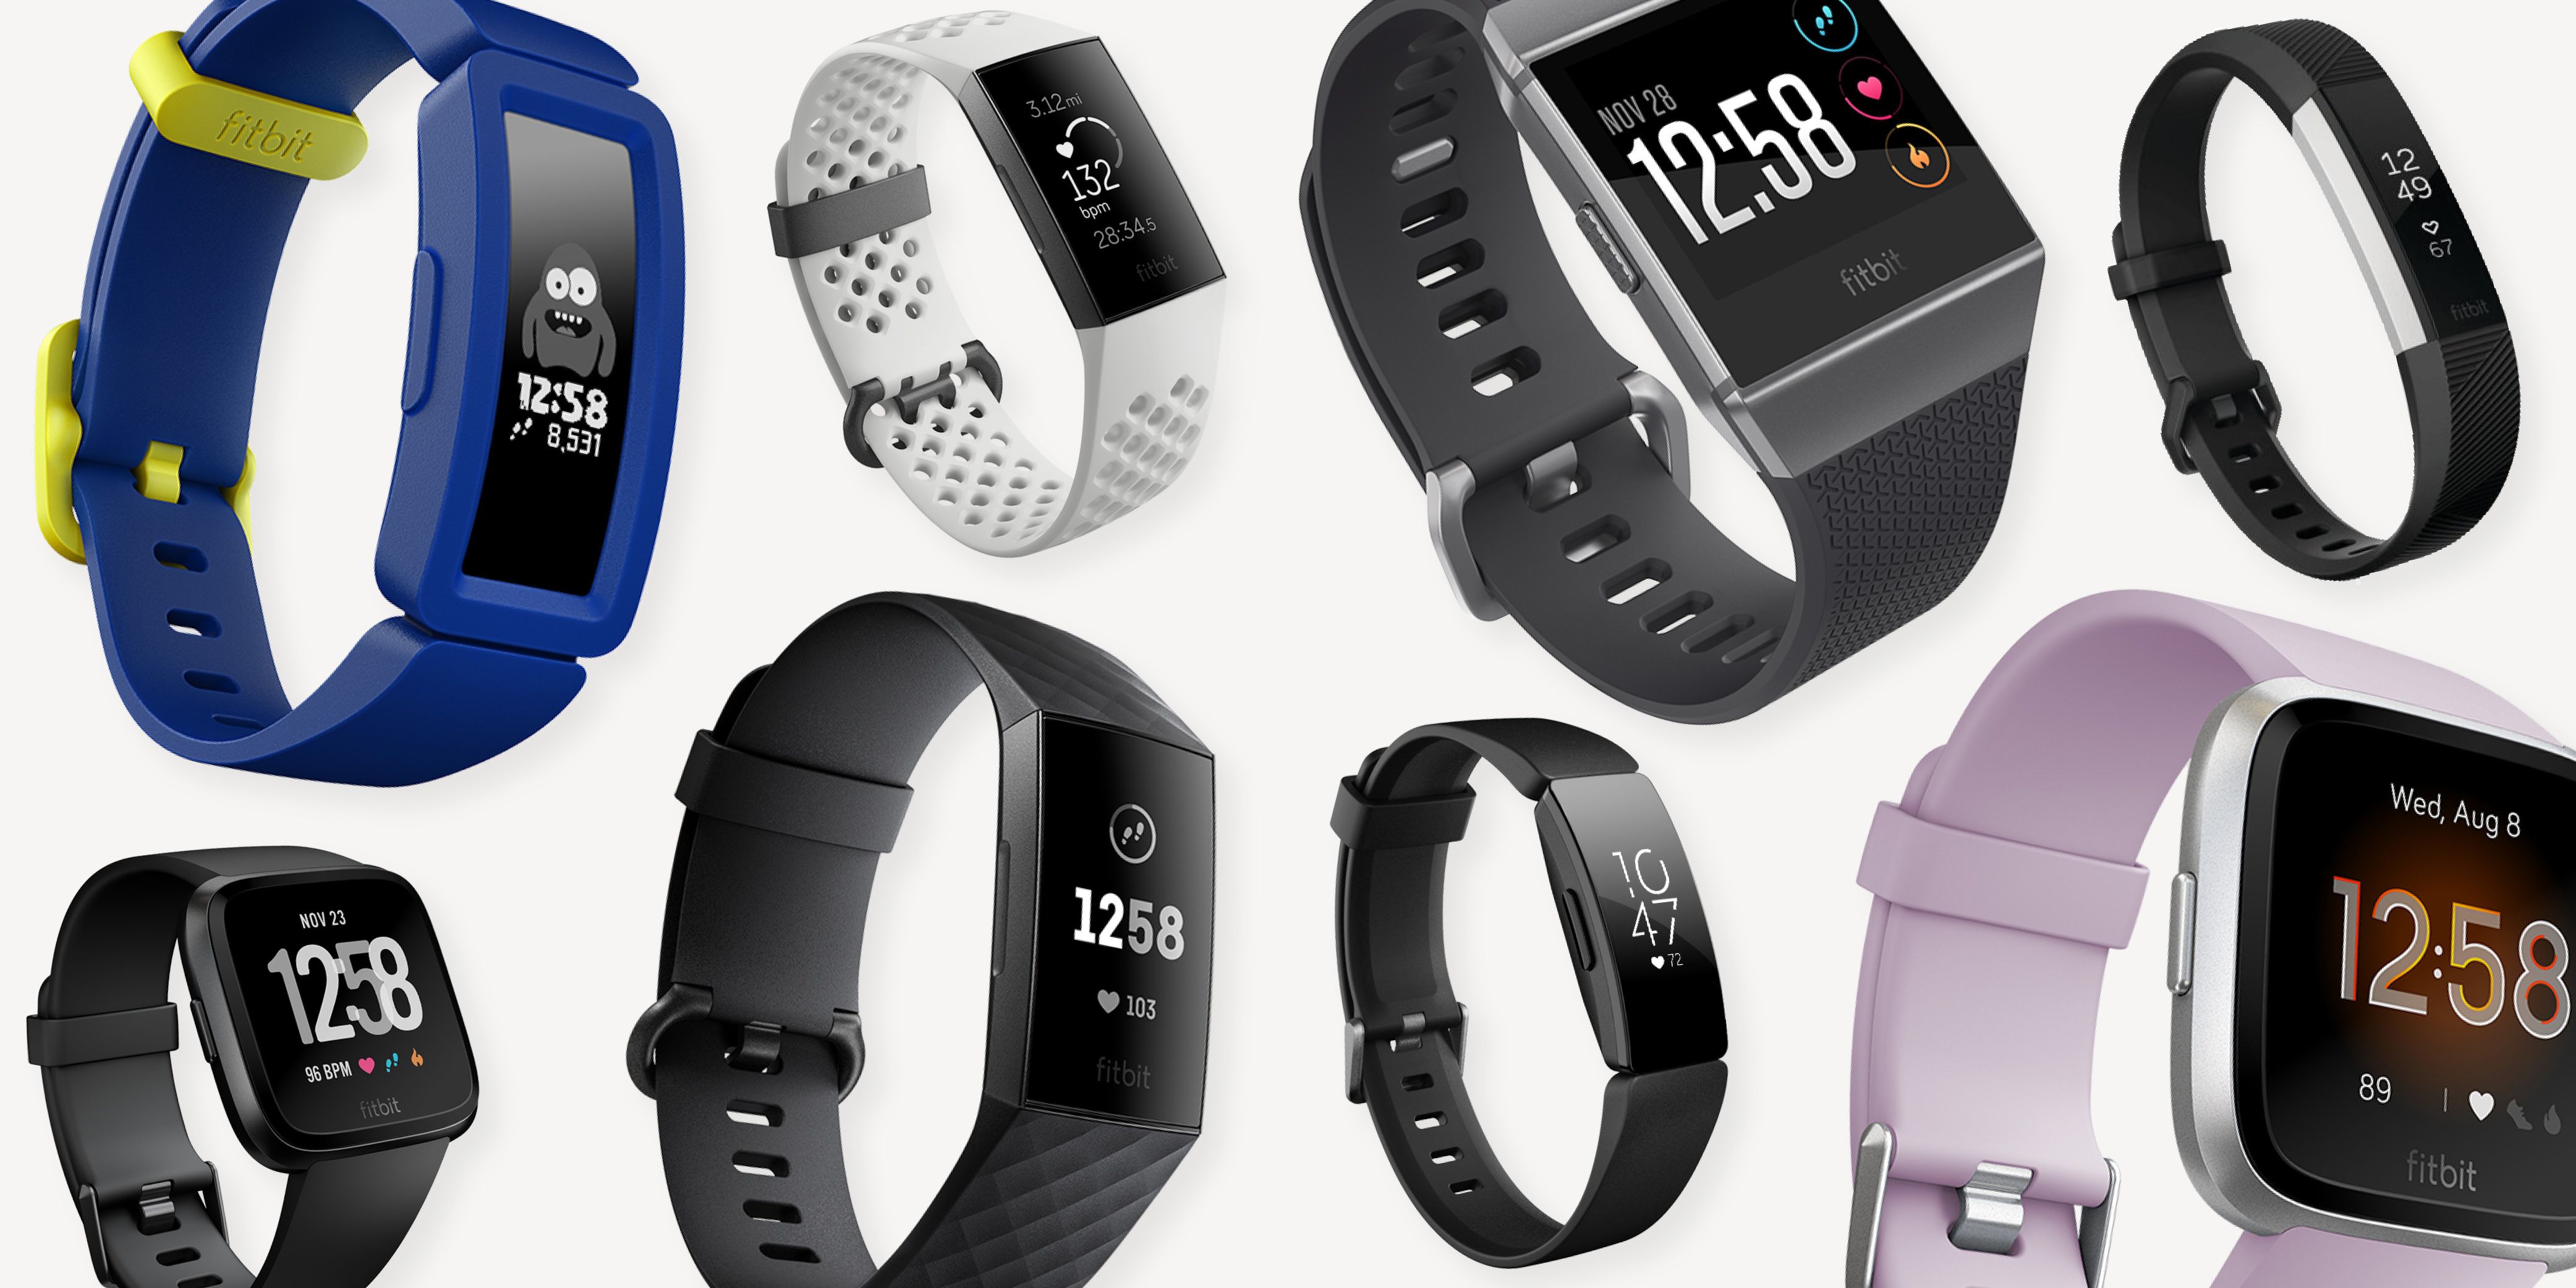 all fitbit models